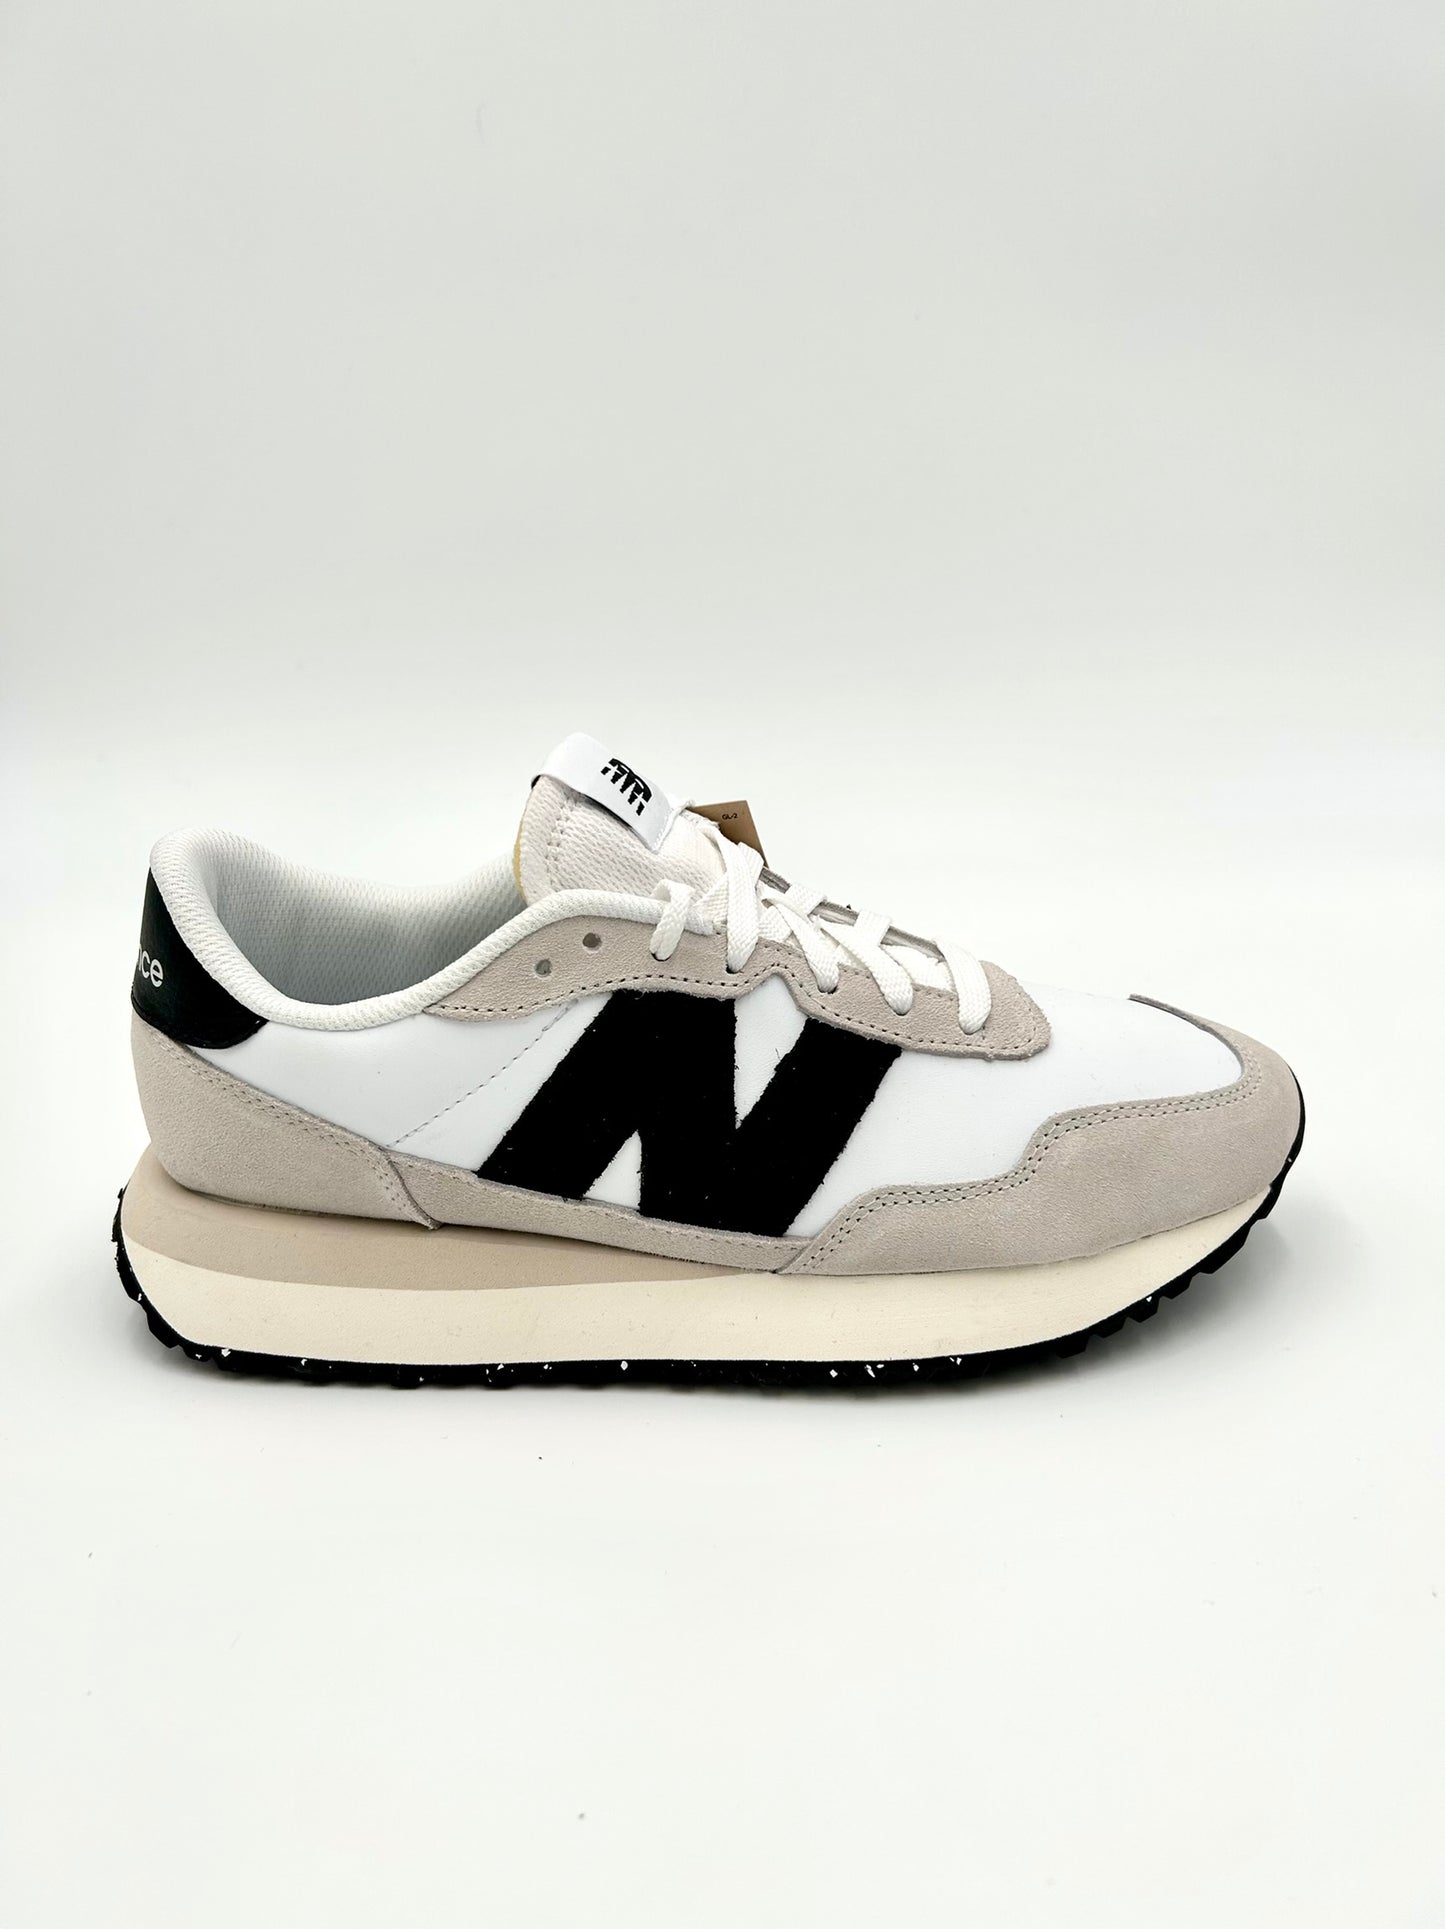 New Balance MS 237 SF - black and white